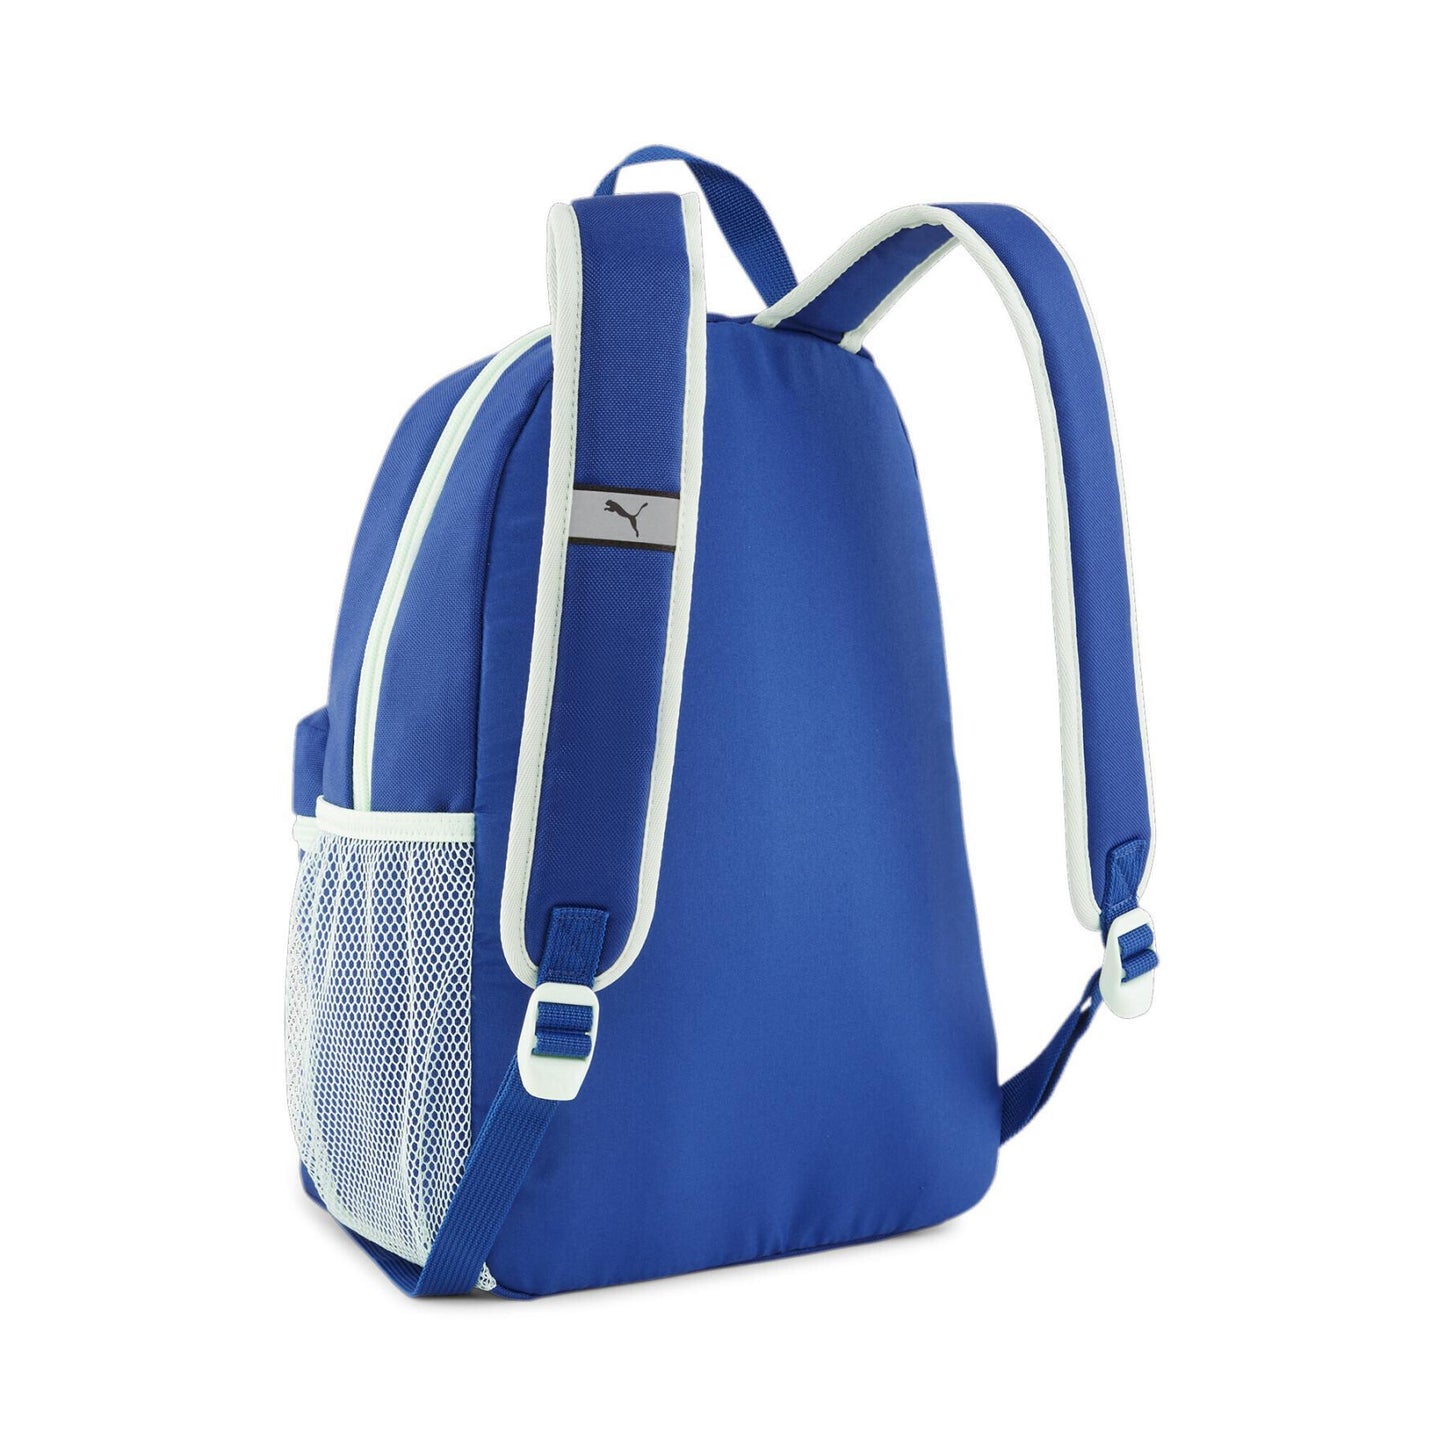 - Phase Small Youth Backpack COBALT GLAZE - (079879 07) - F